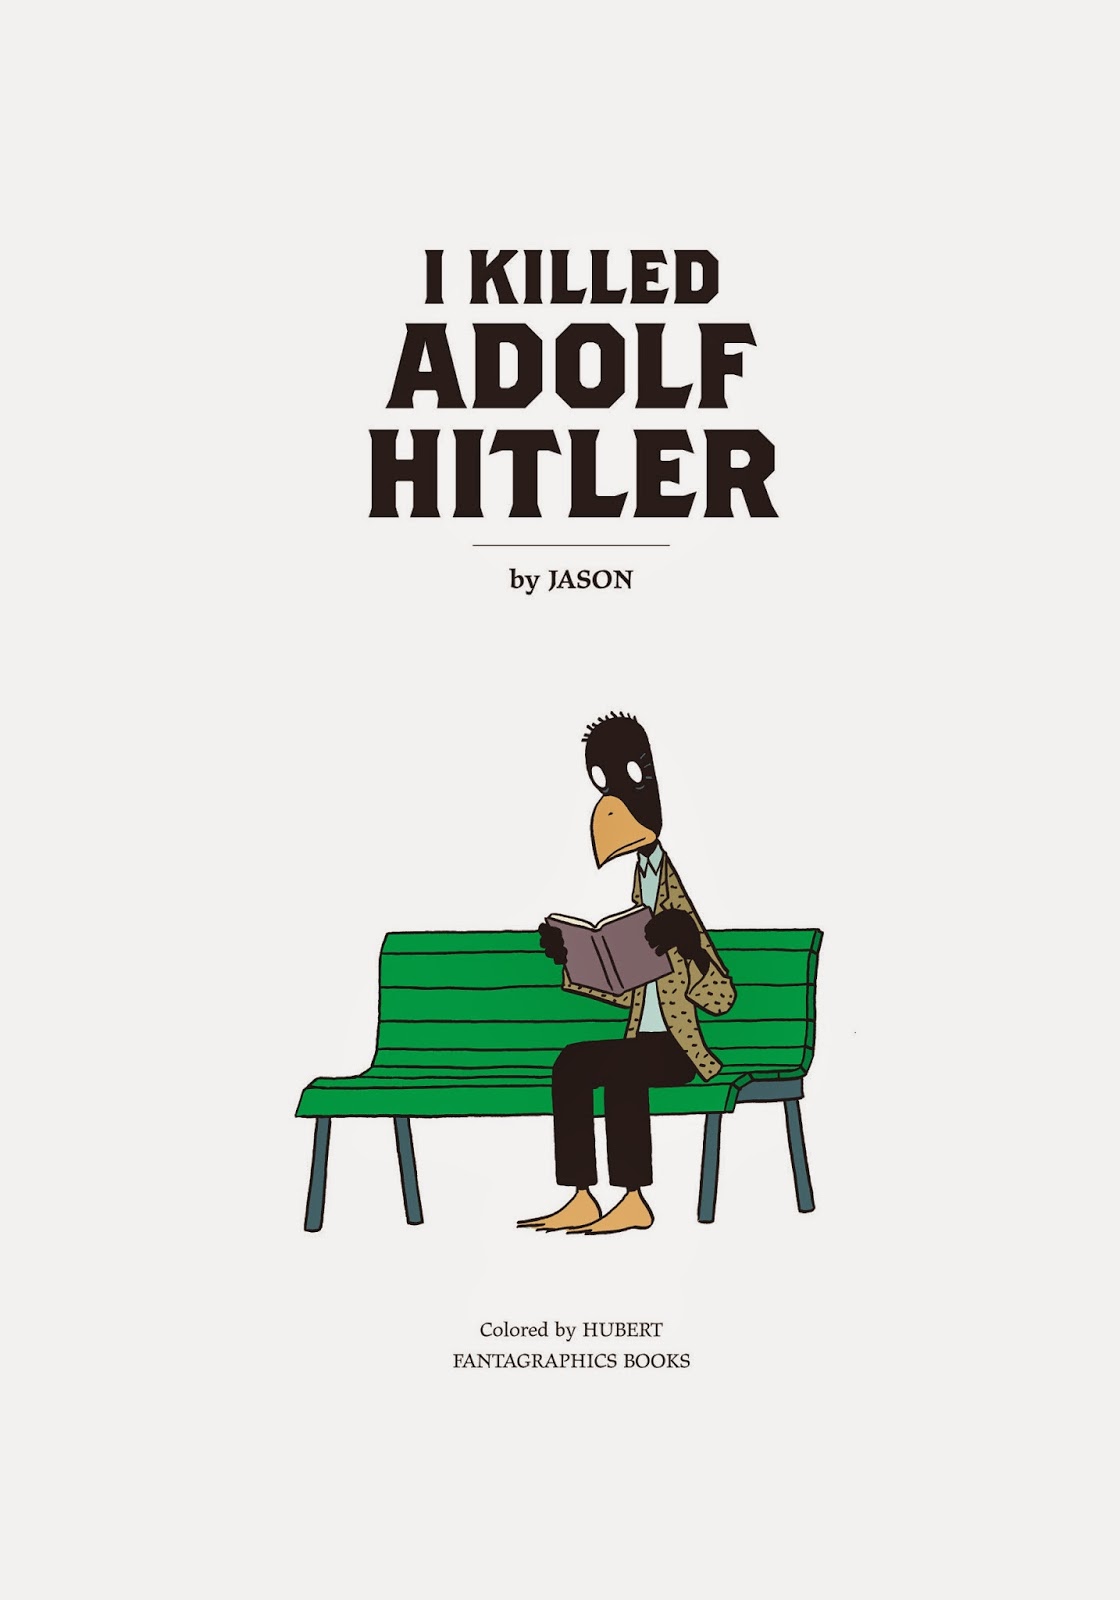 How many people did Hitler kill? - Quora